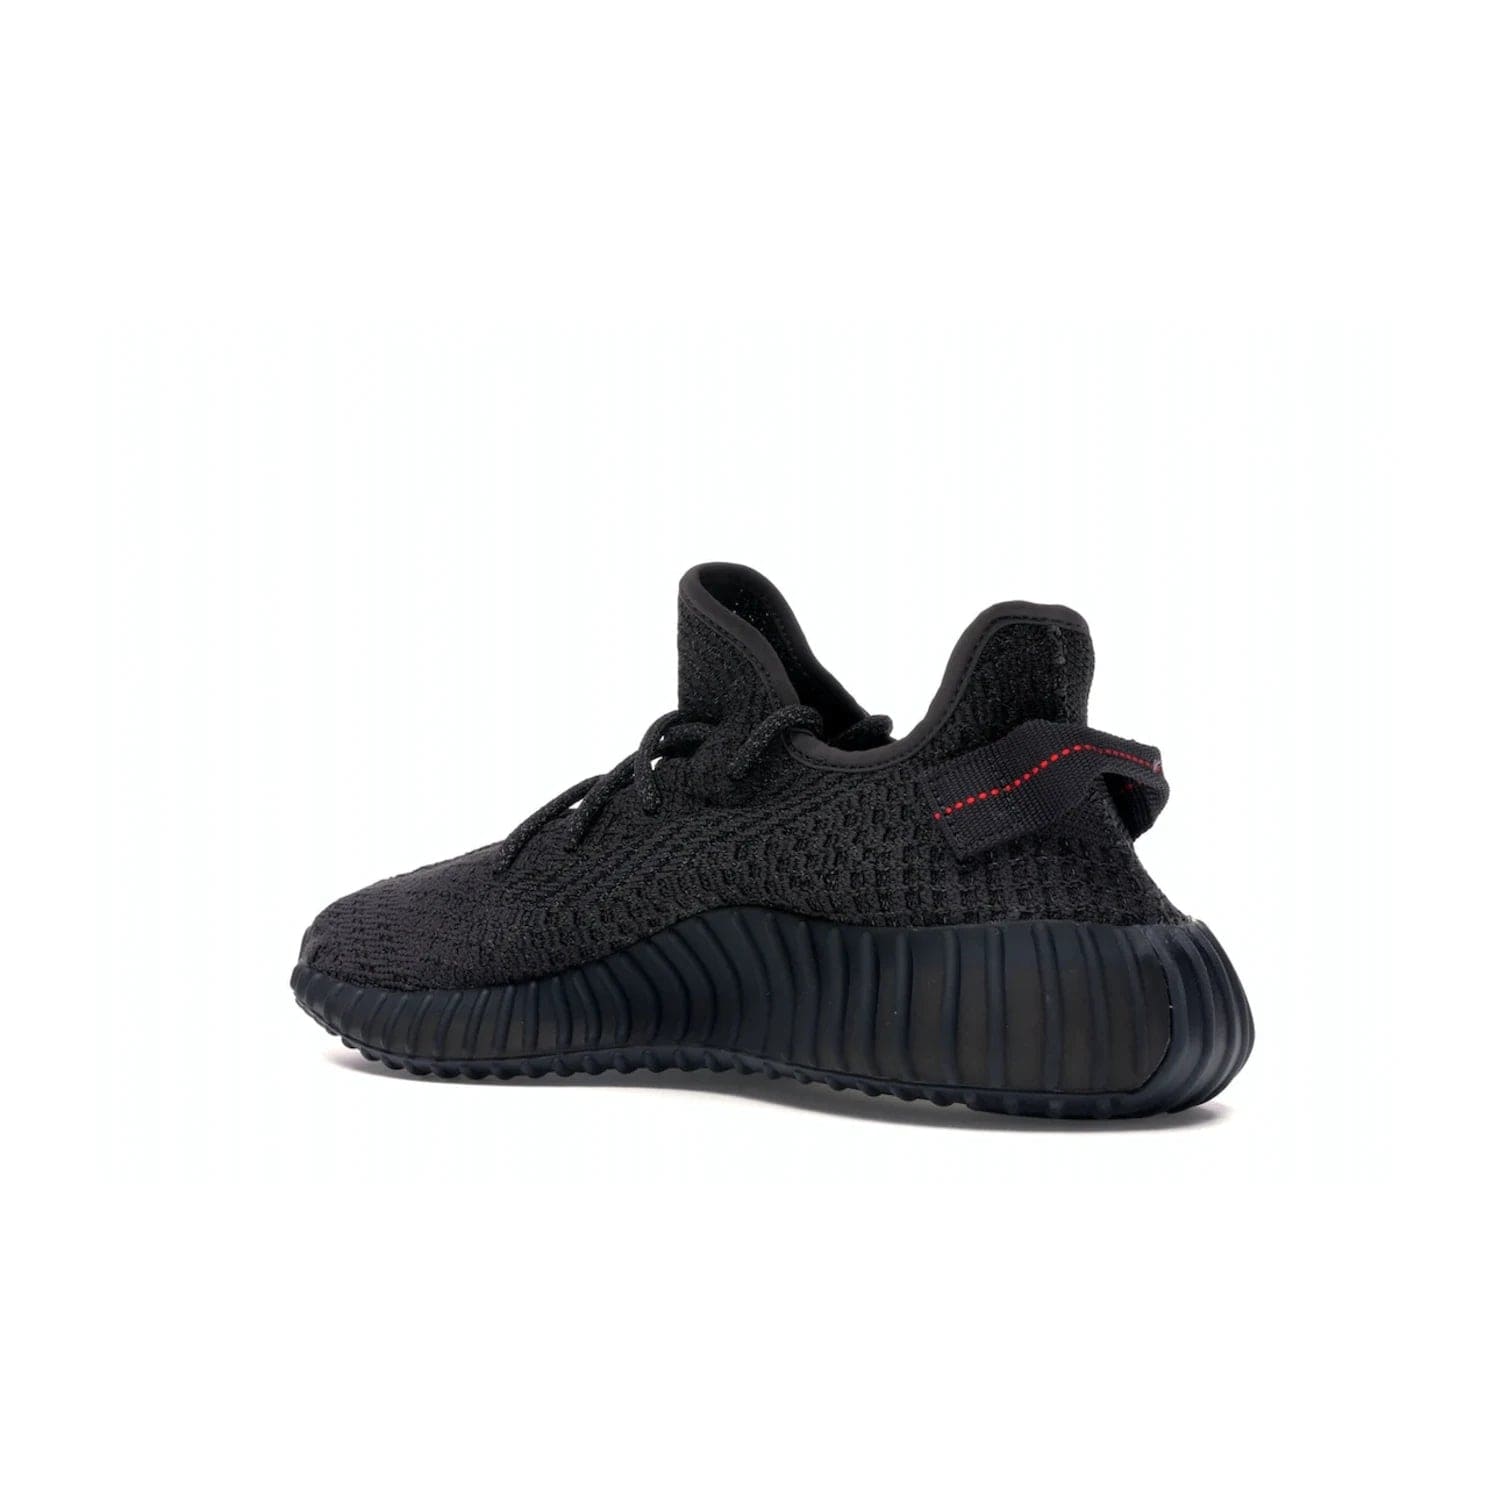 adidas Yeezy Boost 350 V2 Static Black (Reflective) - Image 23 - Only at www.BallersClubKickz.com - Make a statement with the adidas Yeezy Boost 350 V2 Static Black Reflective. All-black upper, reflective accents, midsole, and sole combine for a stylish look. High quality materials. June 2019 release. Add to your collection today.